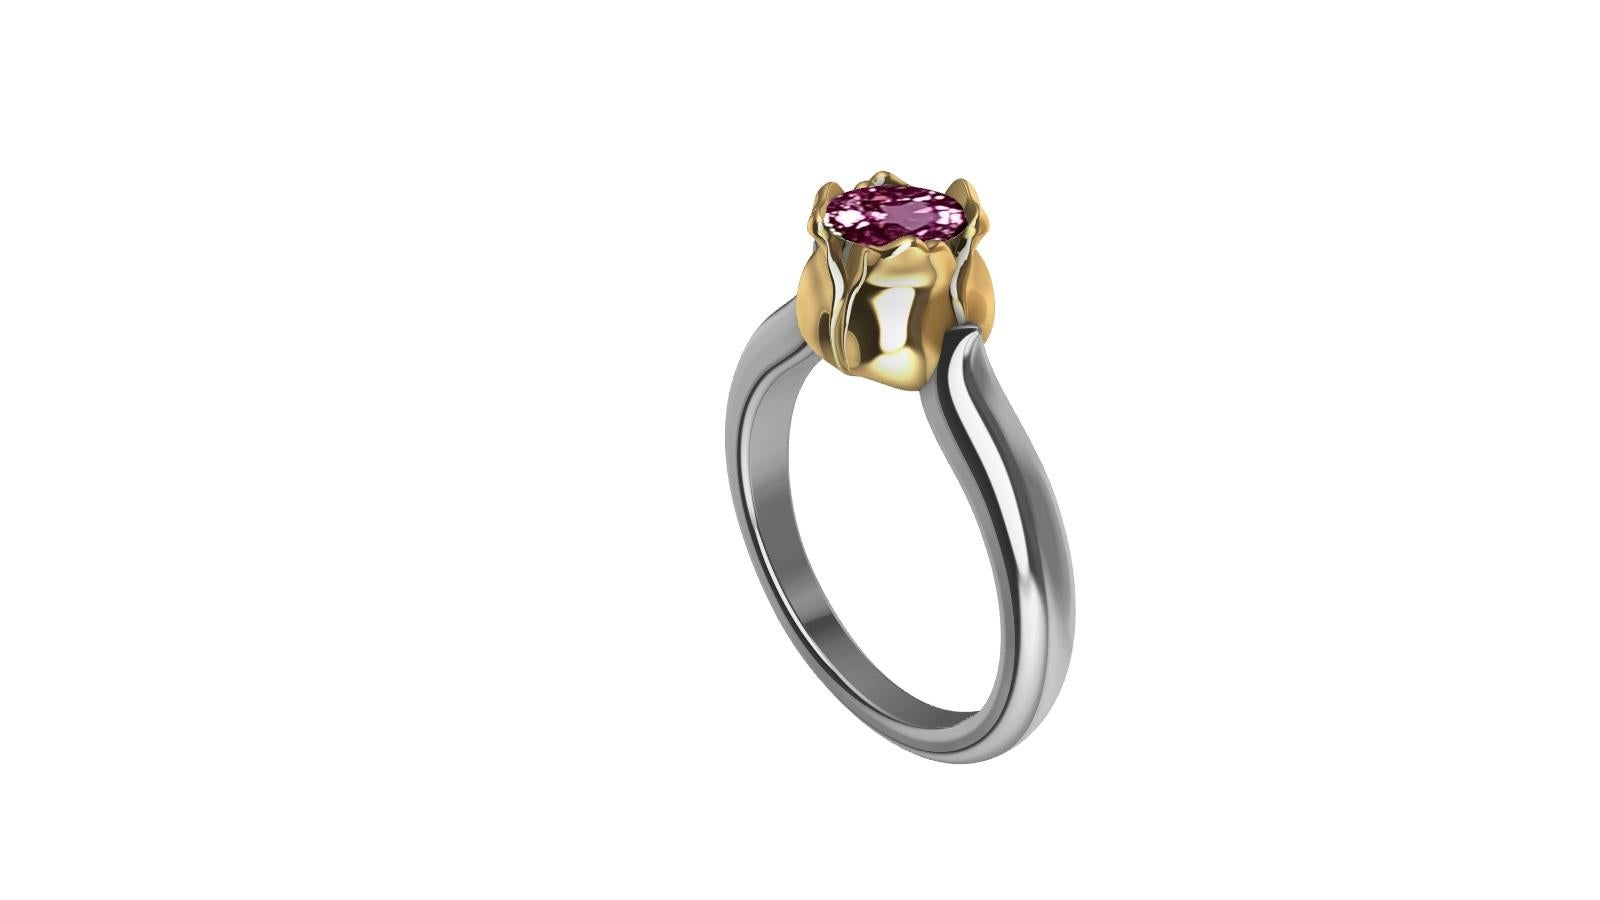 For Sale:  18 Karat Yellow Gold and Platinum Ceritfied Pink Sapphire 1.18 Carat Tulip Ring 6